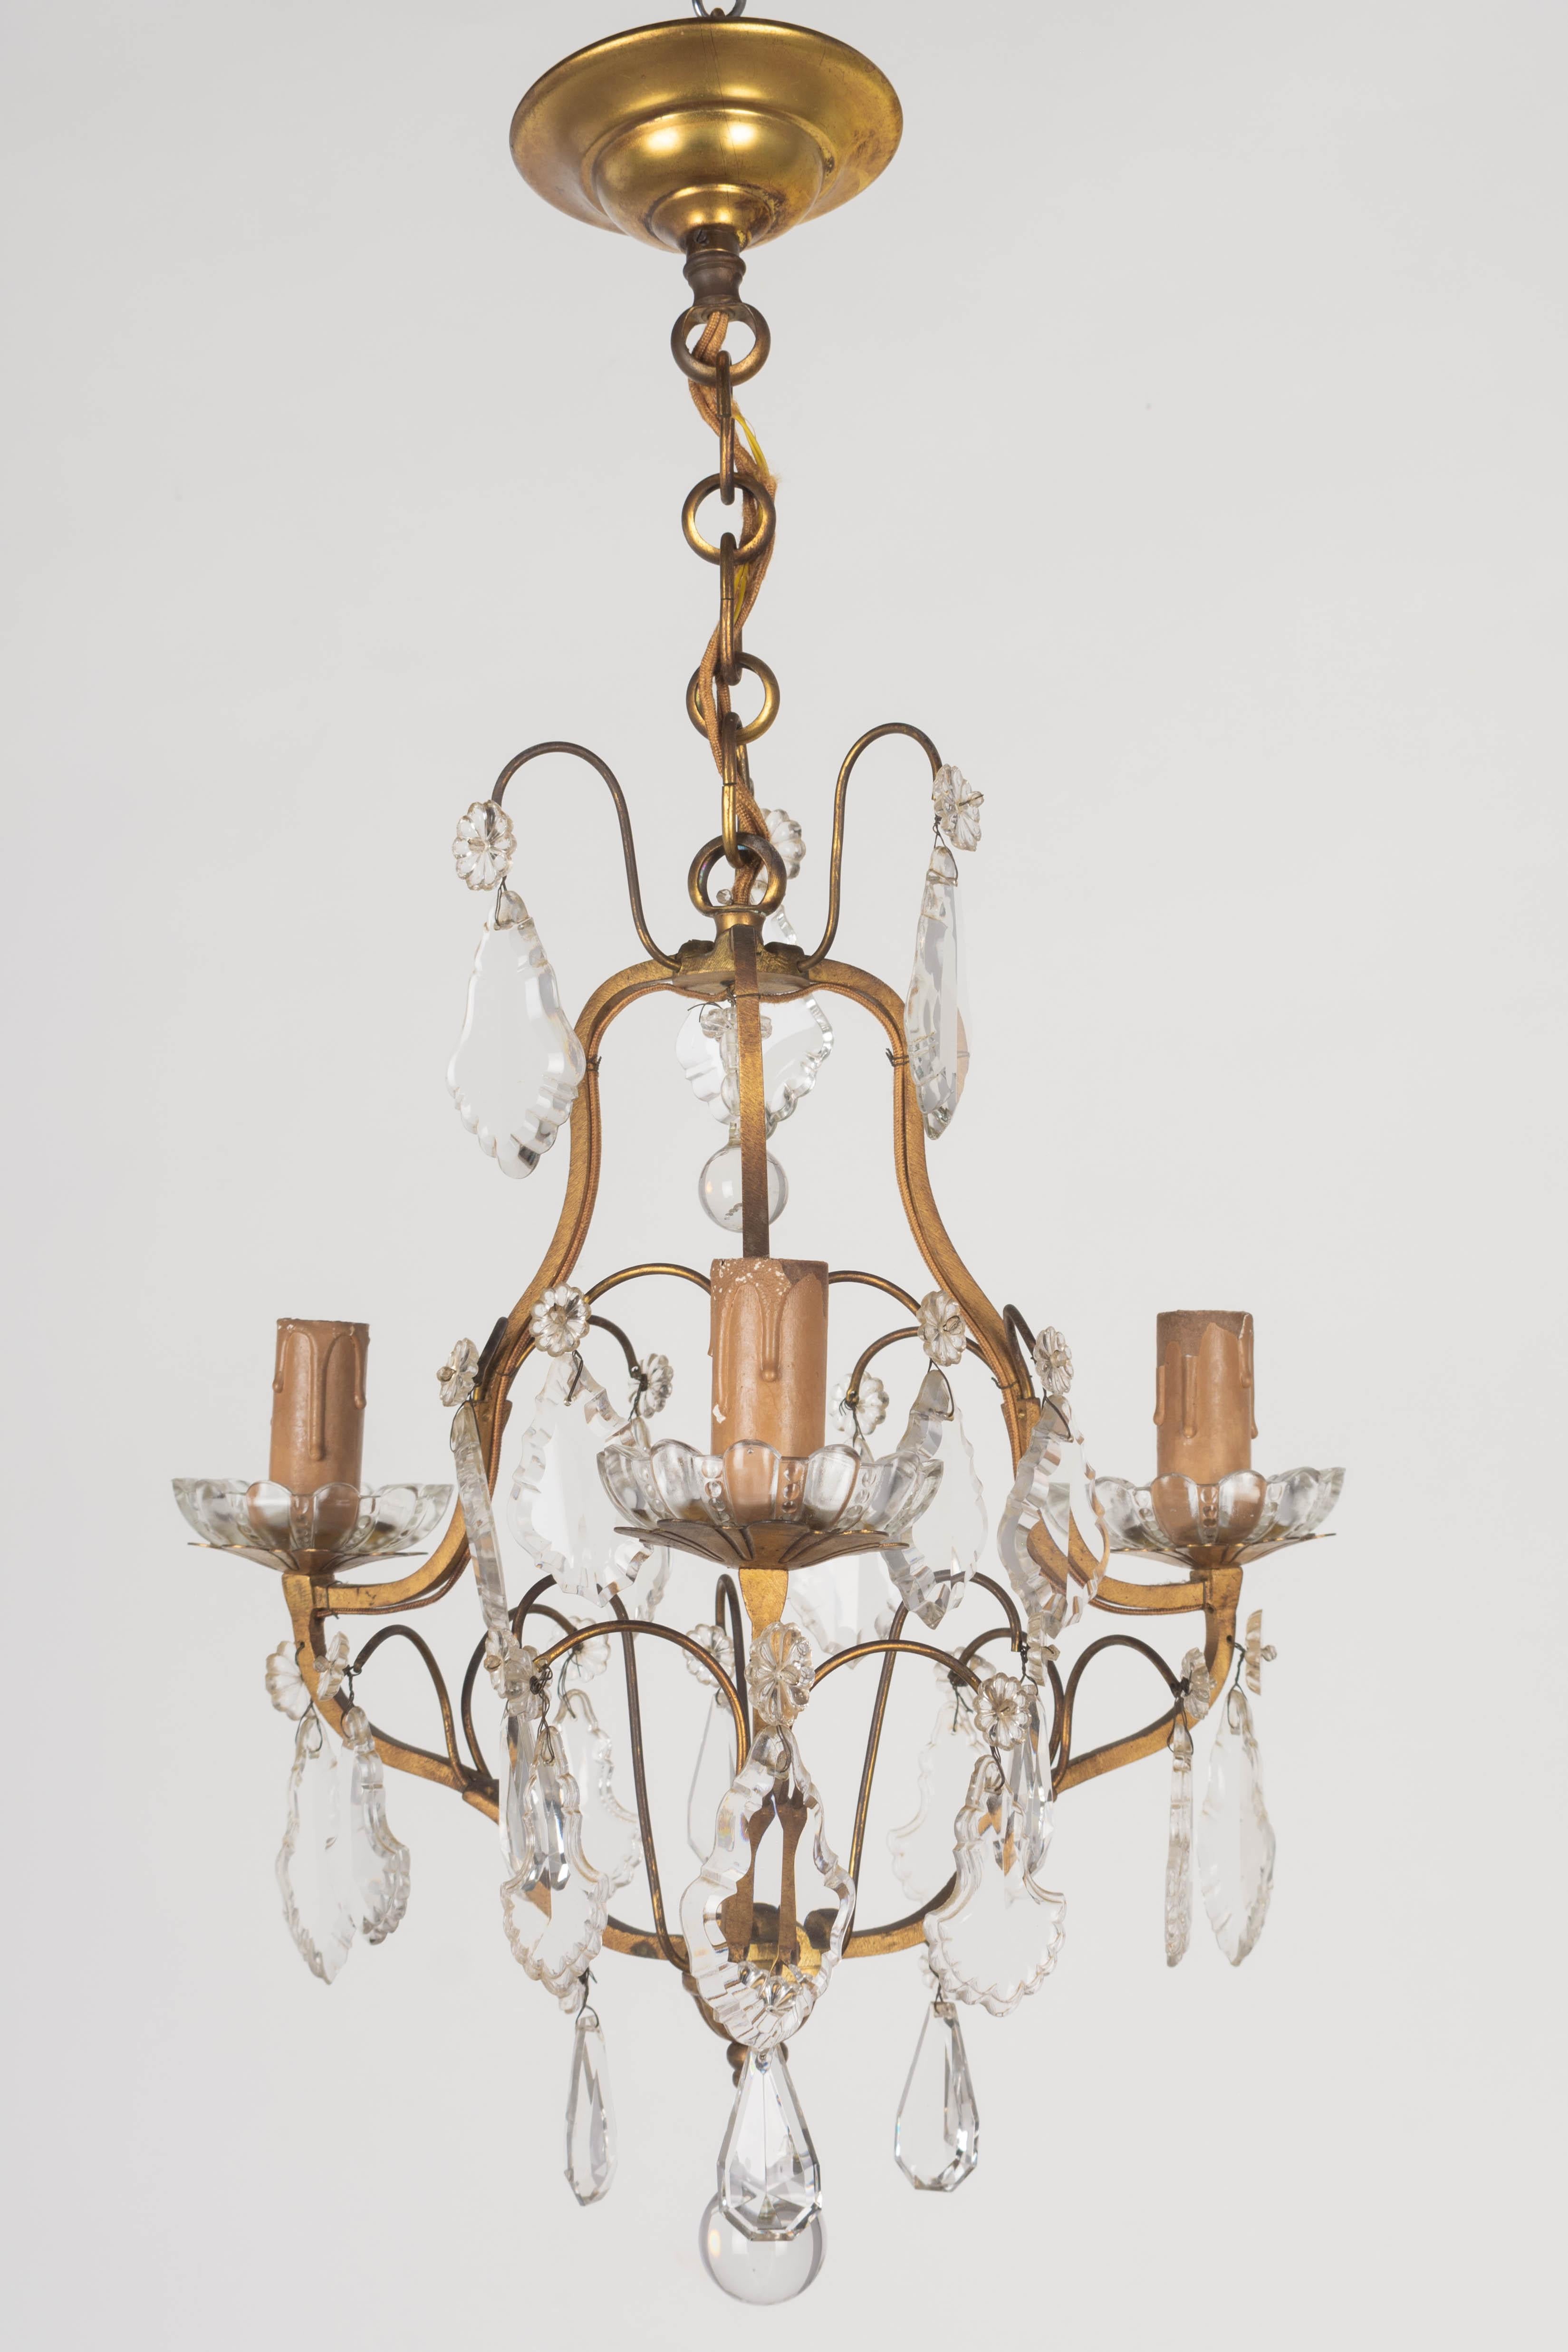 A French Louis XV style three-light brass chandelier with a variety of crystal prisms, pendalogues and rosettes and old wood candle covers. Matching chain and canopy. Retaining a nice warm patina. In working condition with original wiring and